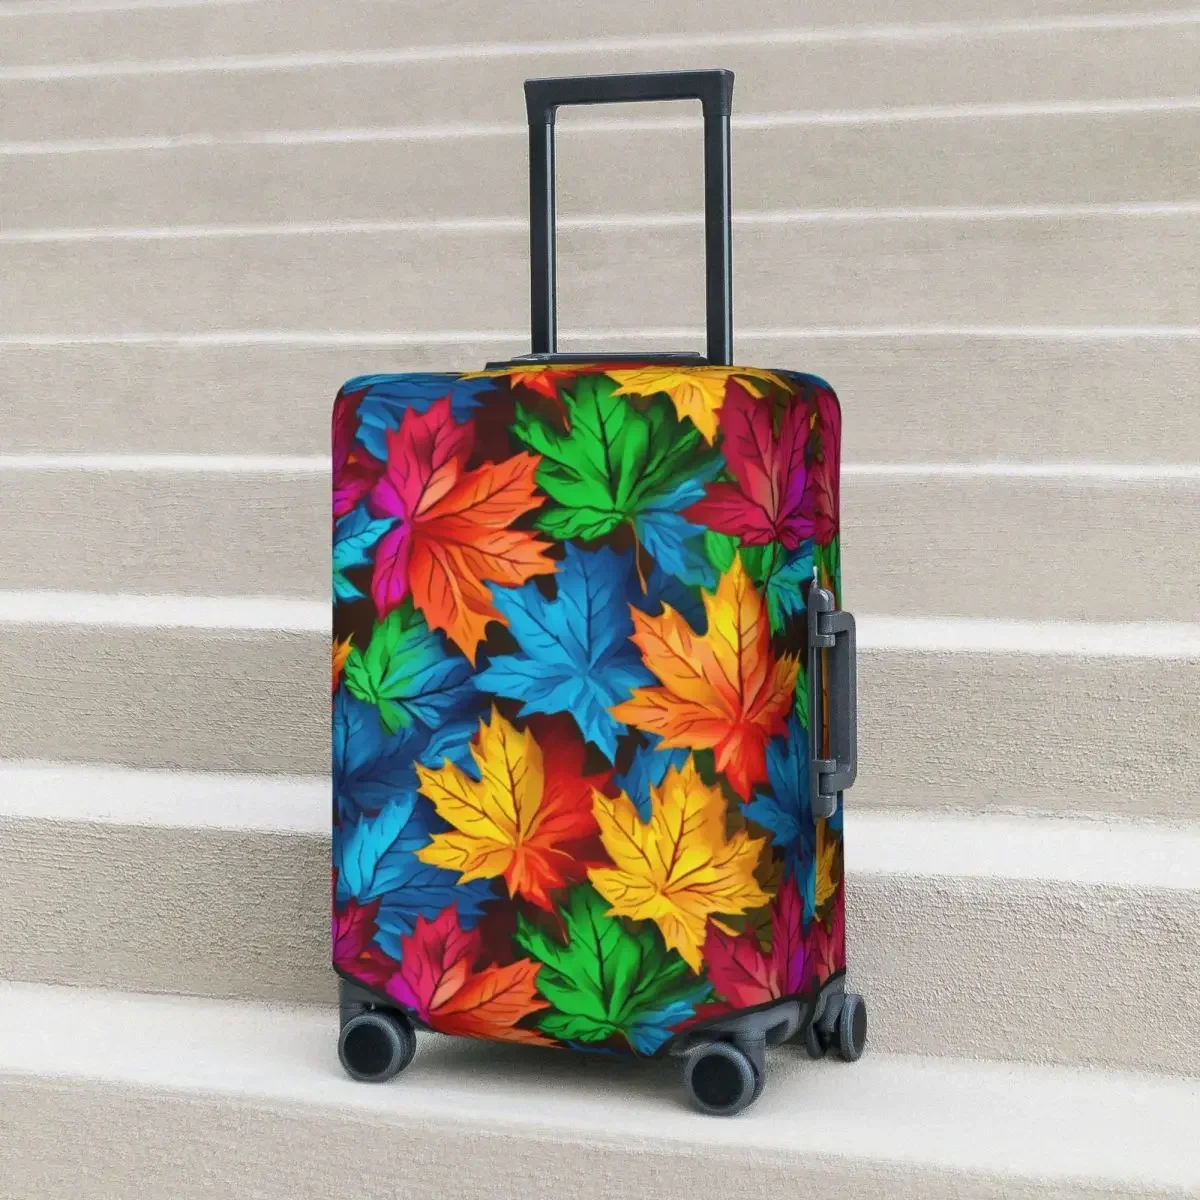 

Colorful Maple Leaves Suitcase Cover Vacation Autumn Plant Holiday Strectch Luggage Supplies Business Protector